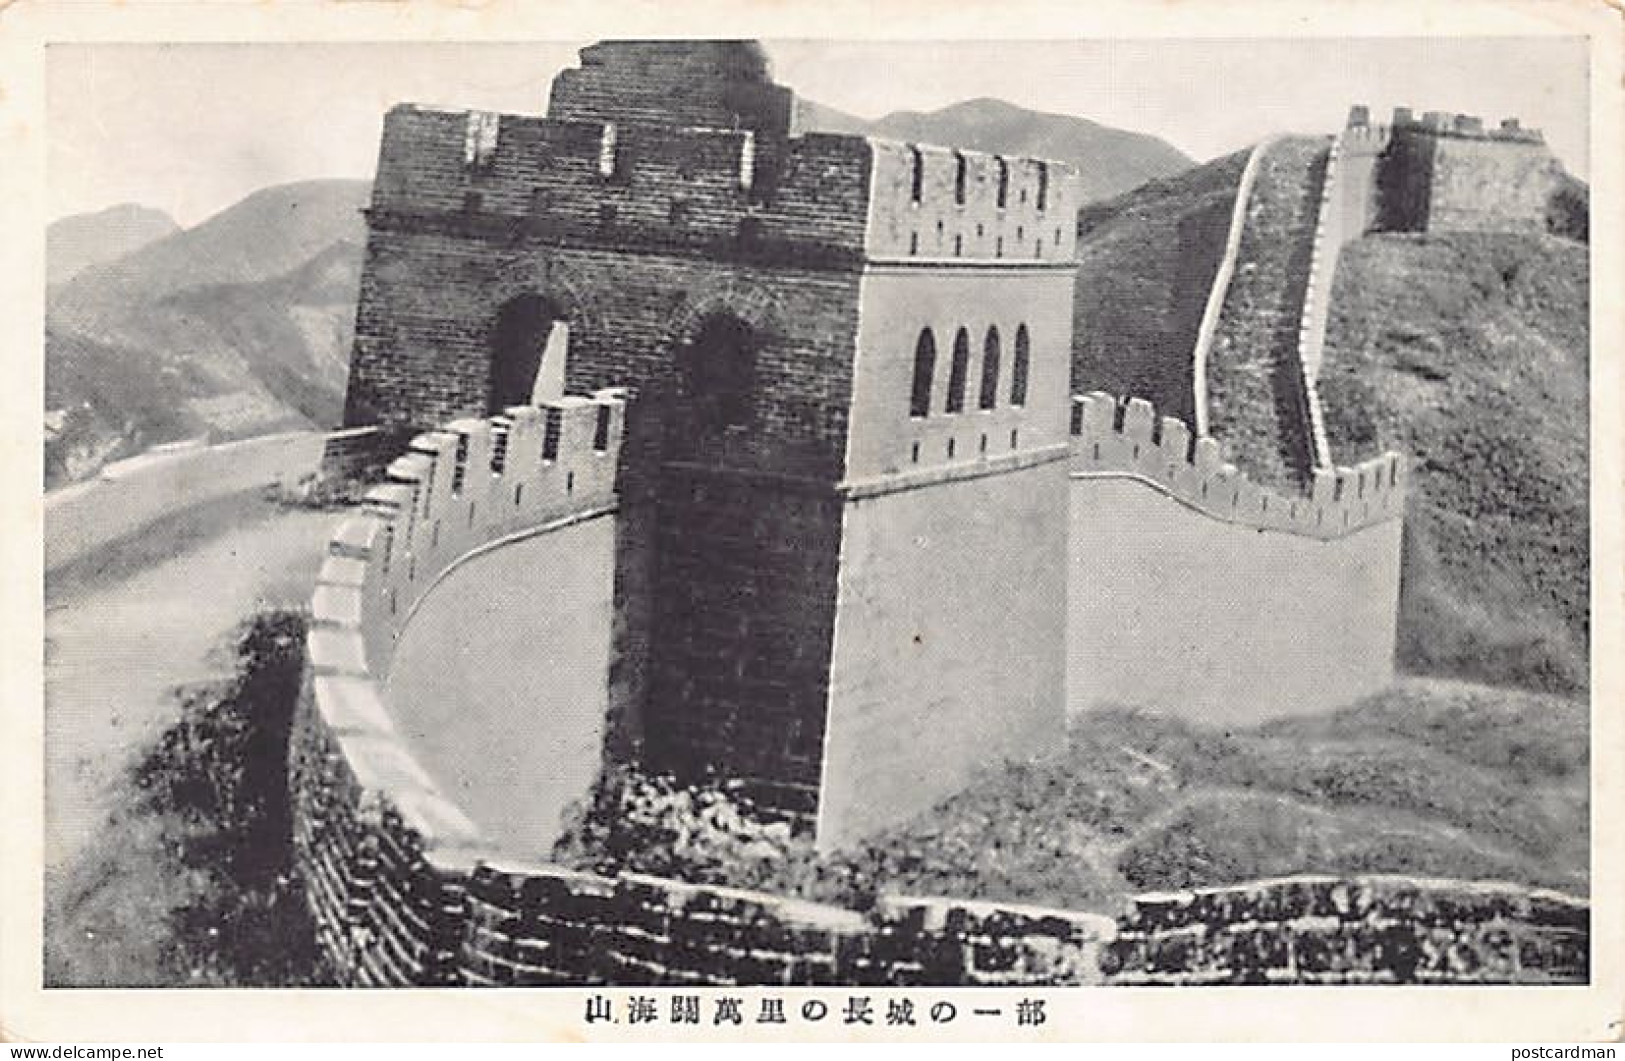 China - The Great Wall - Publ. Unknown  - Cina